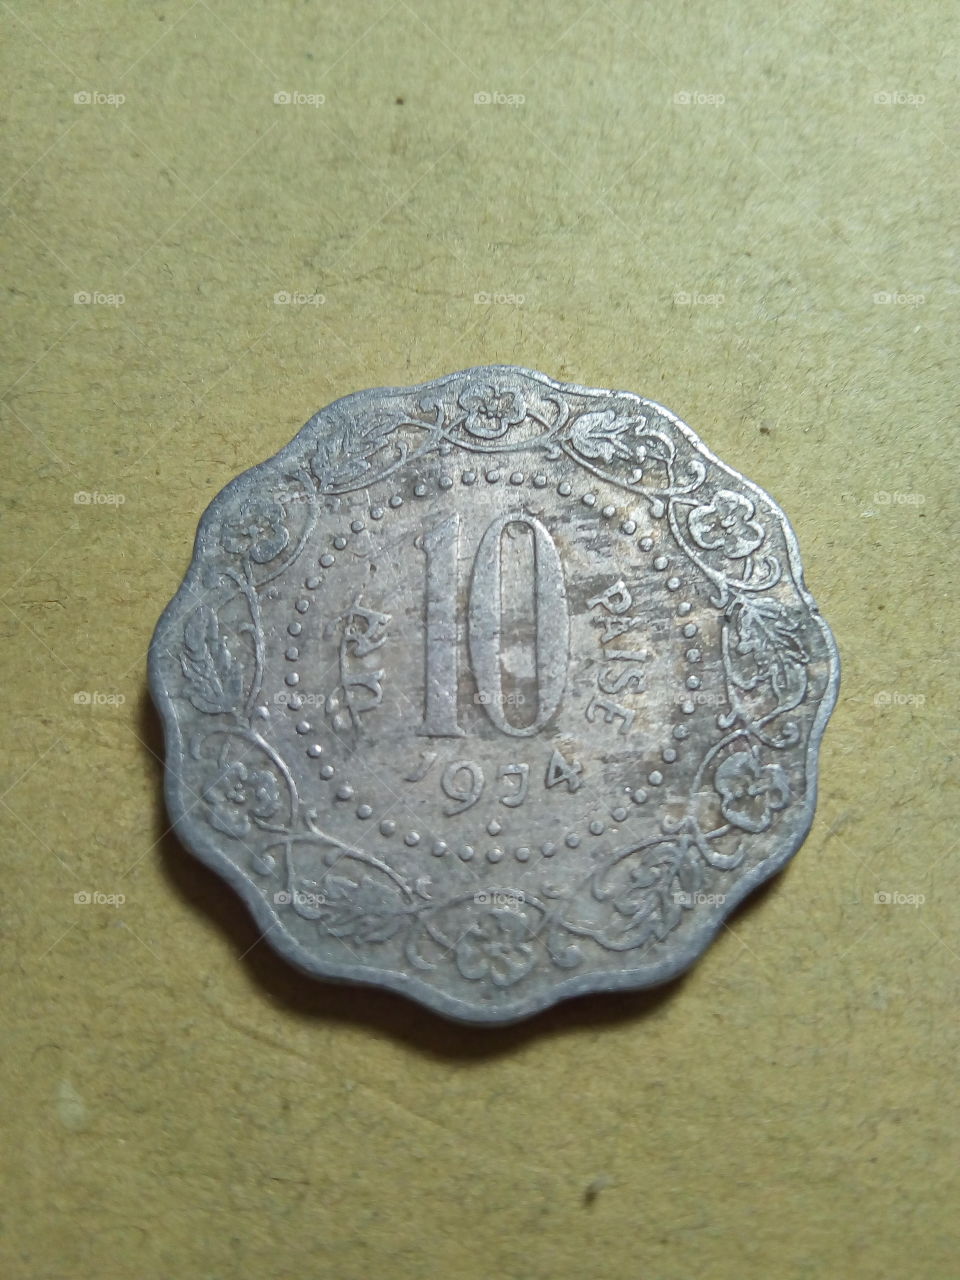 A coin of ten paise- 1/10 share of Indian Rupee issued by Government of India in 1974.